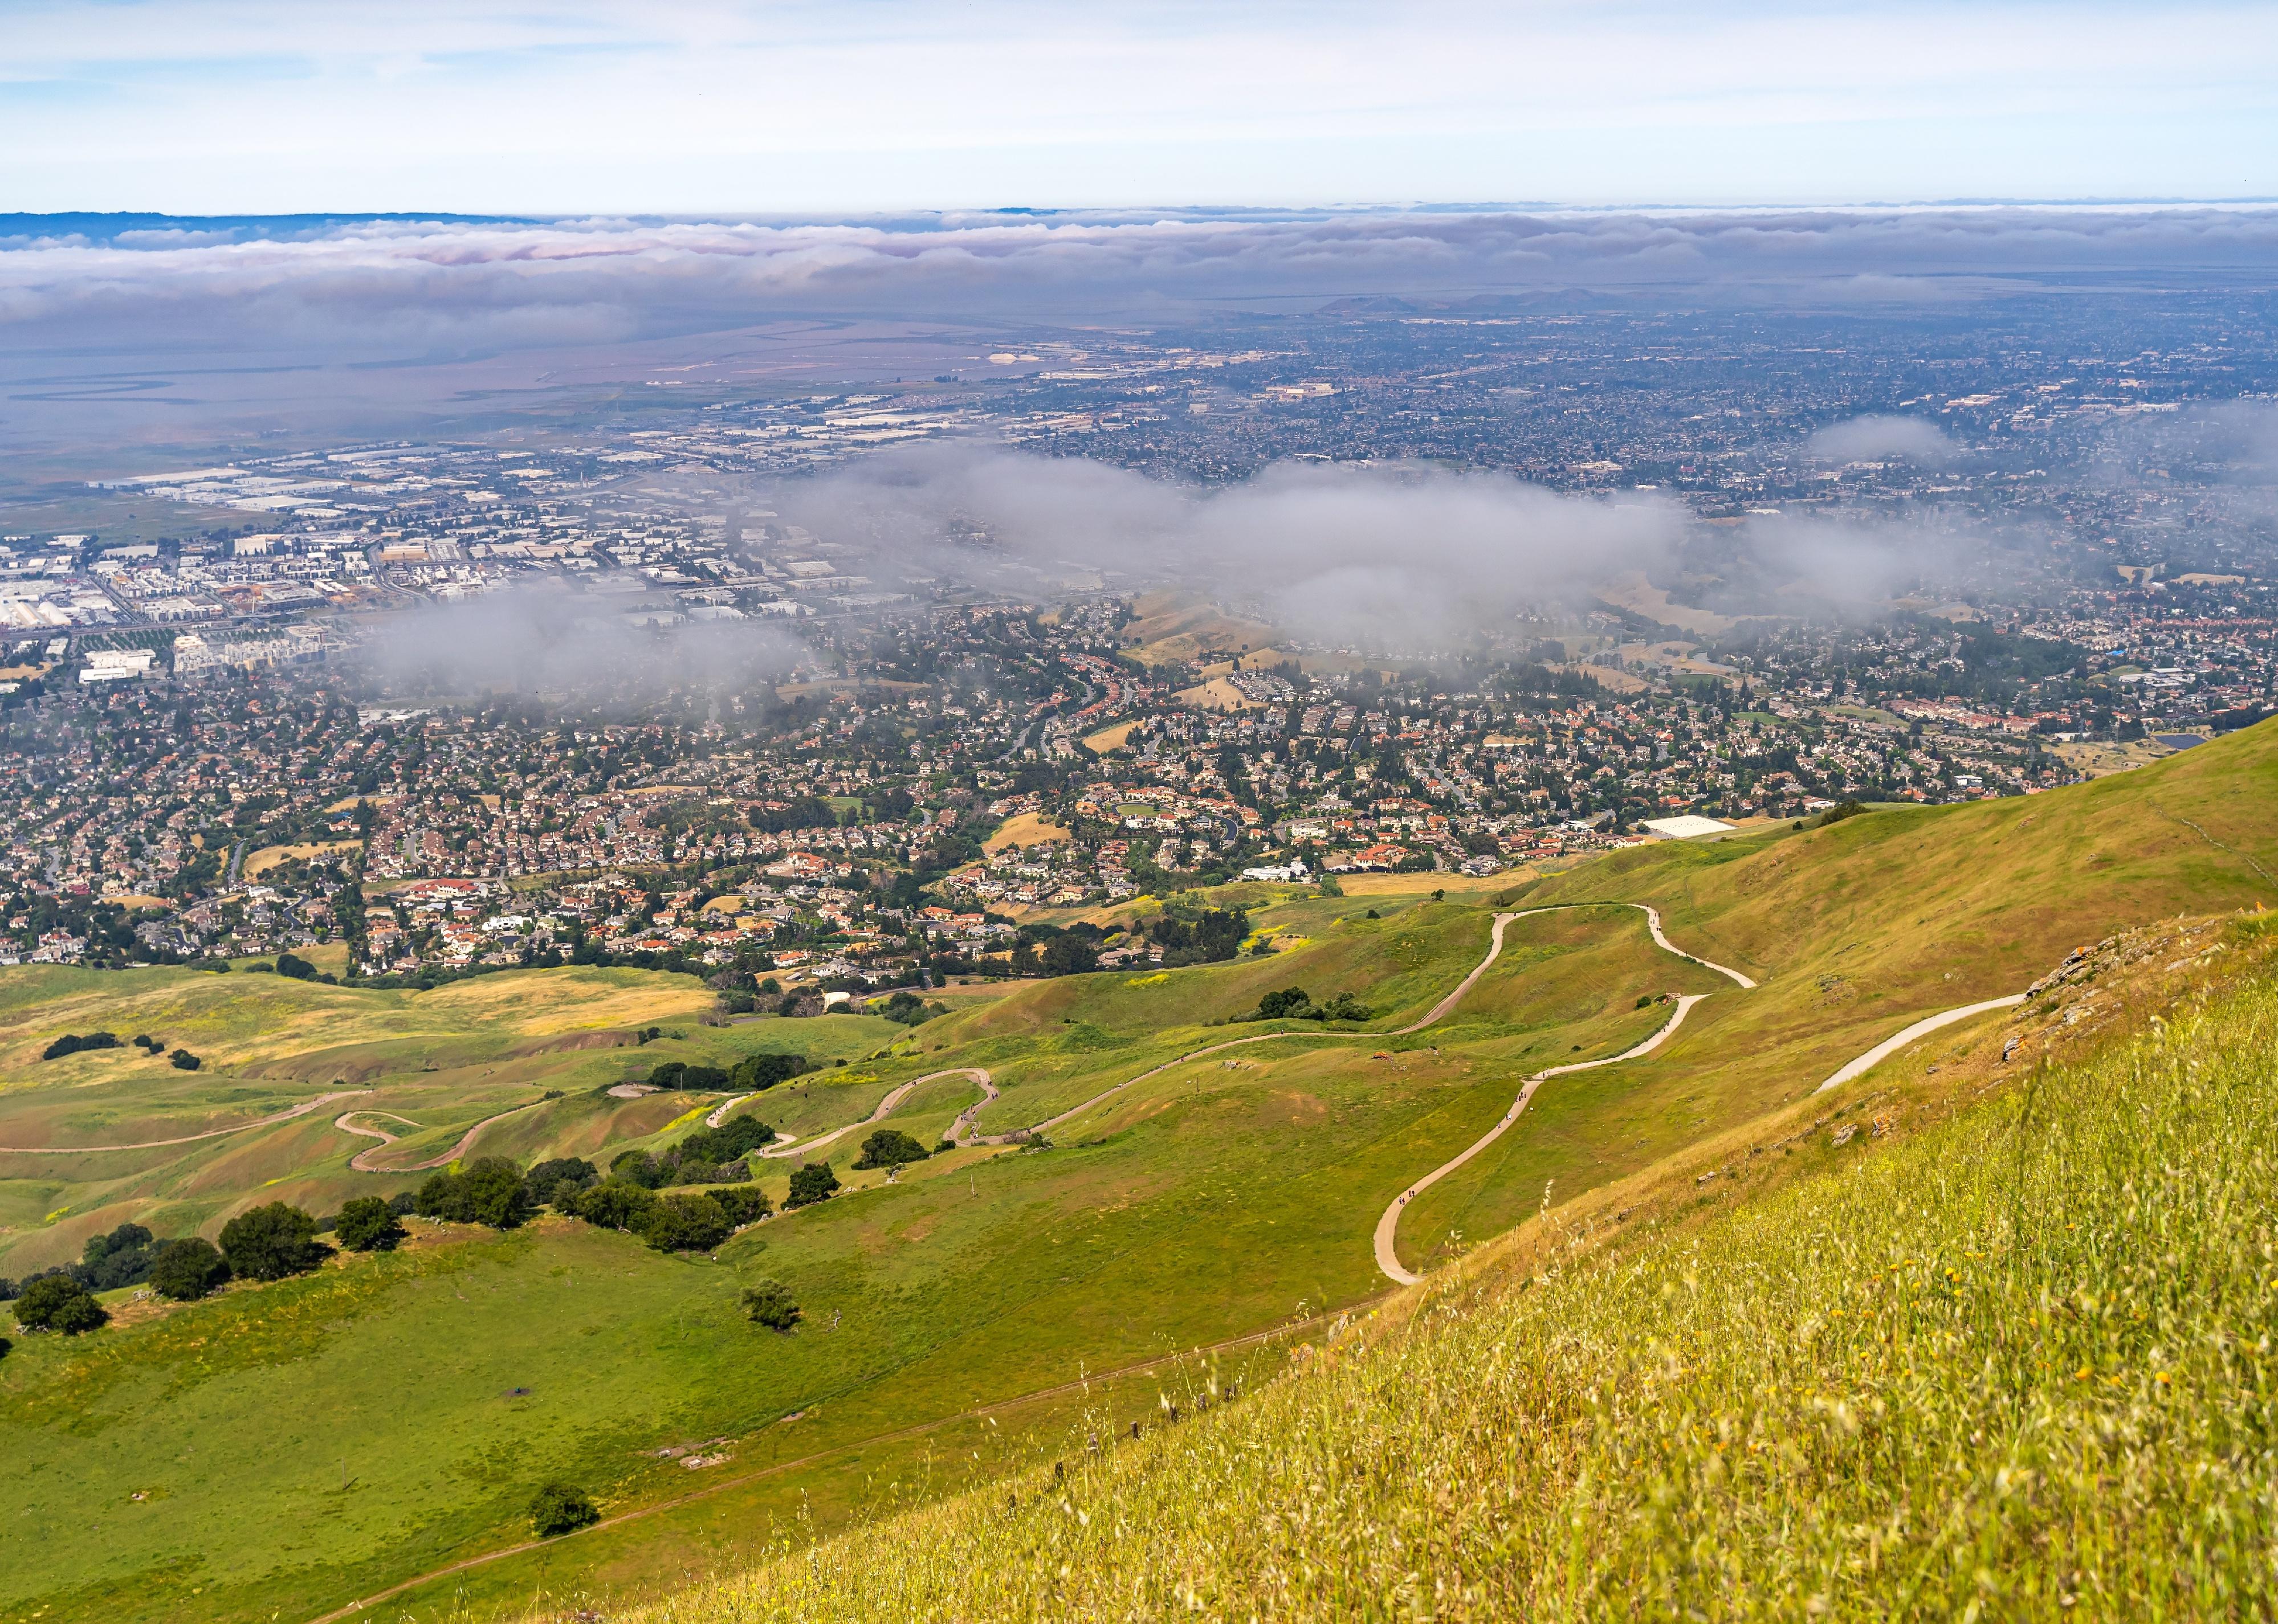 Bay area view from Mission Peak, Fremont.